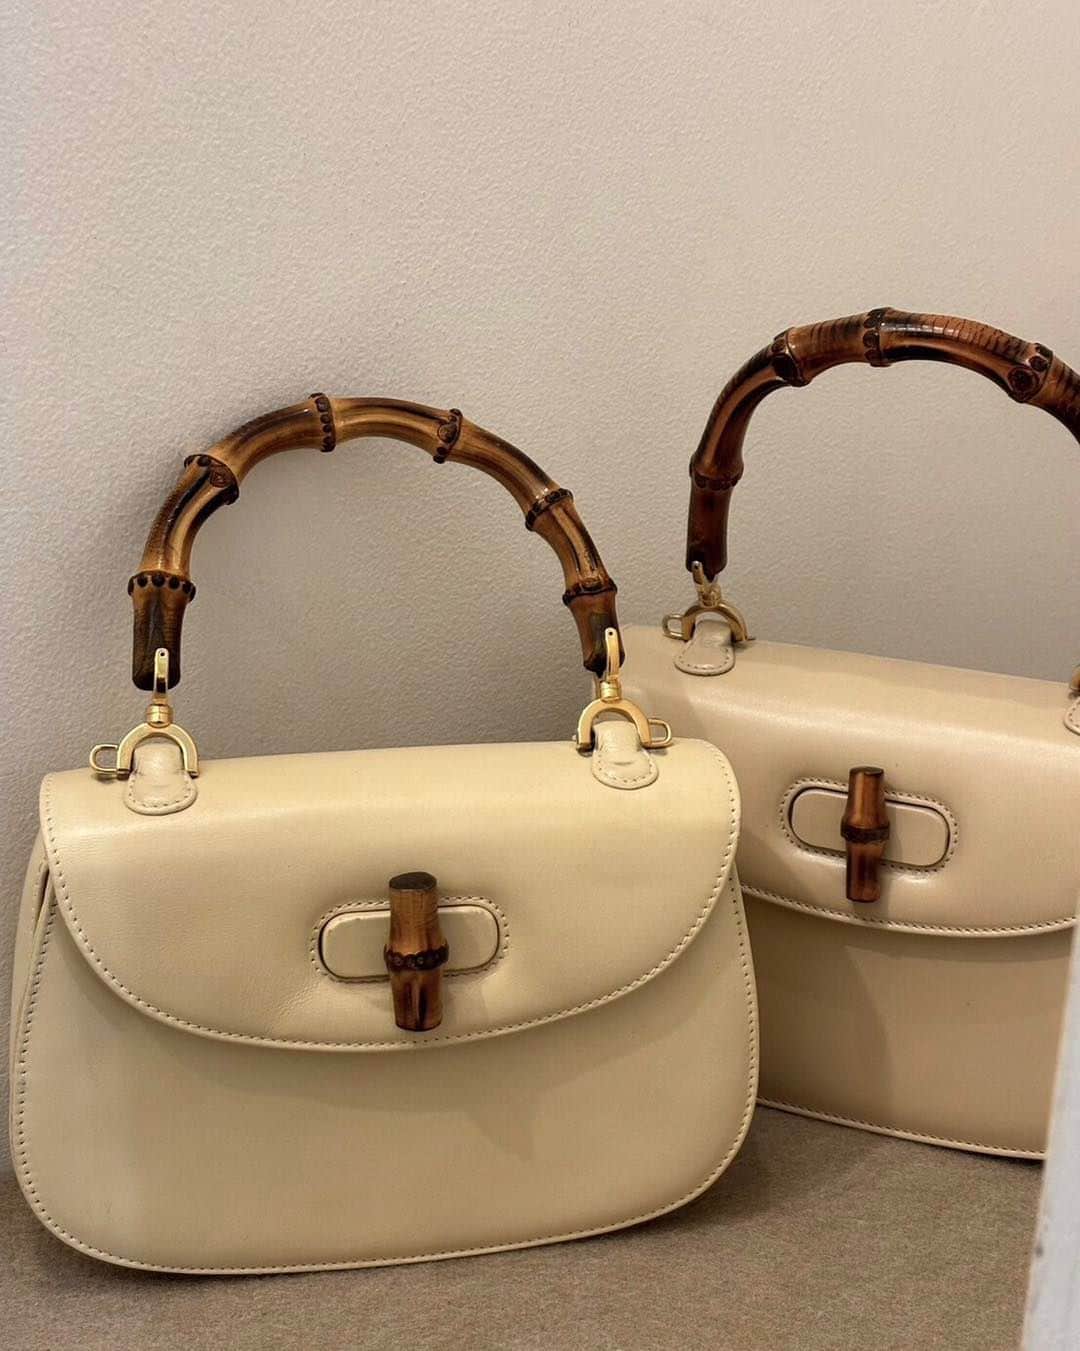 Ｈedyのインスタグラム：「. ［Left］ GUCCI バンブーターンロック2Wayハンドバッグ 品番:H23110003G  ［Right］ GUCCI バンブーターンロック2Wayハンドバッグ 品番:H23110005G  ※2点共WEB掲載予定  For free overseas shipping services, please visit global website.（www.hedyjp.com）  @hedy_daikanyama @hedy_osaka_ @hedy_fukuoka @hedy_fashion  #hedy #hedy_japan #hedy_vintage  #vintageshop」